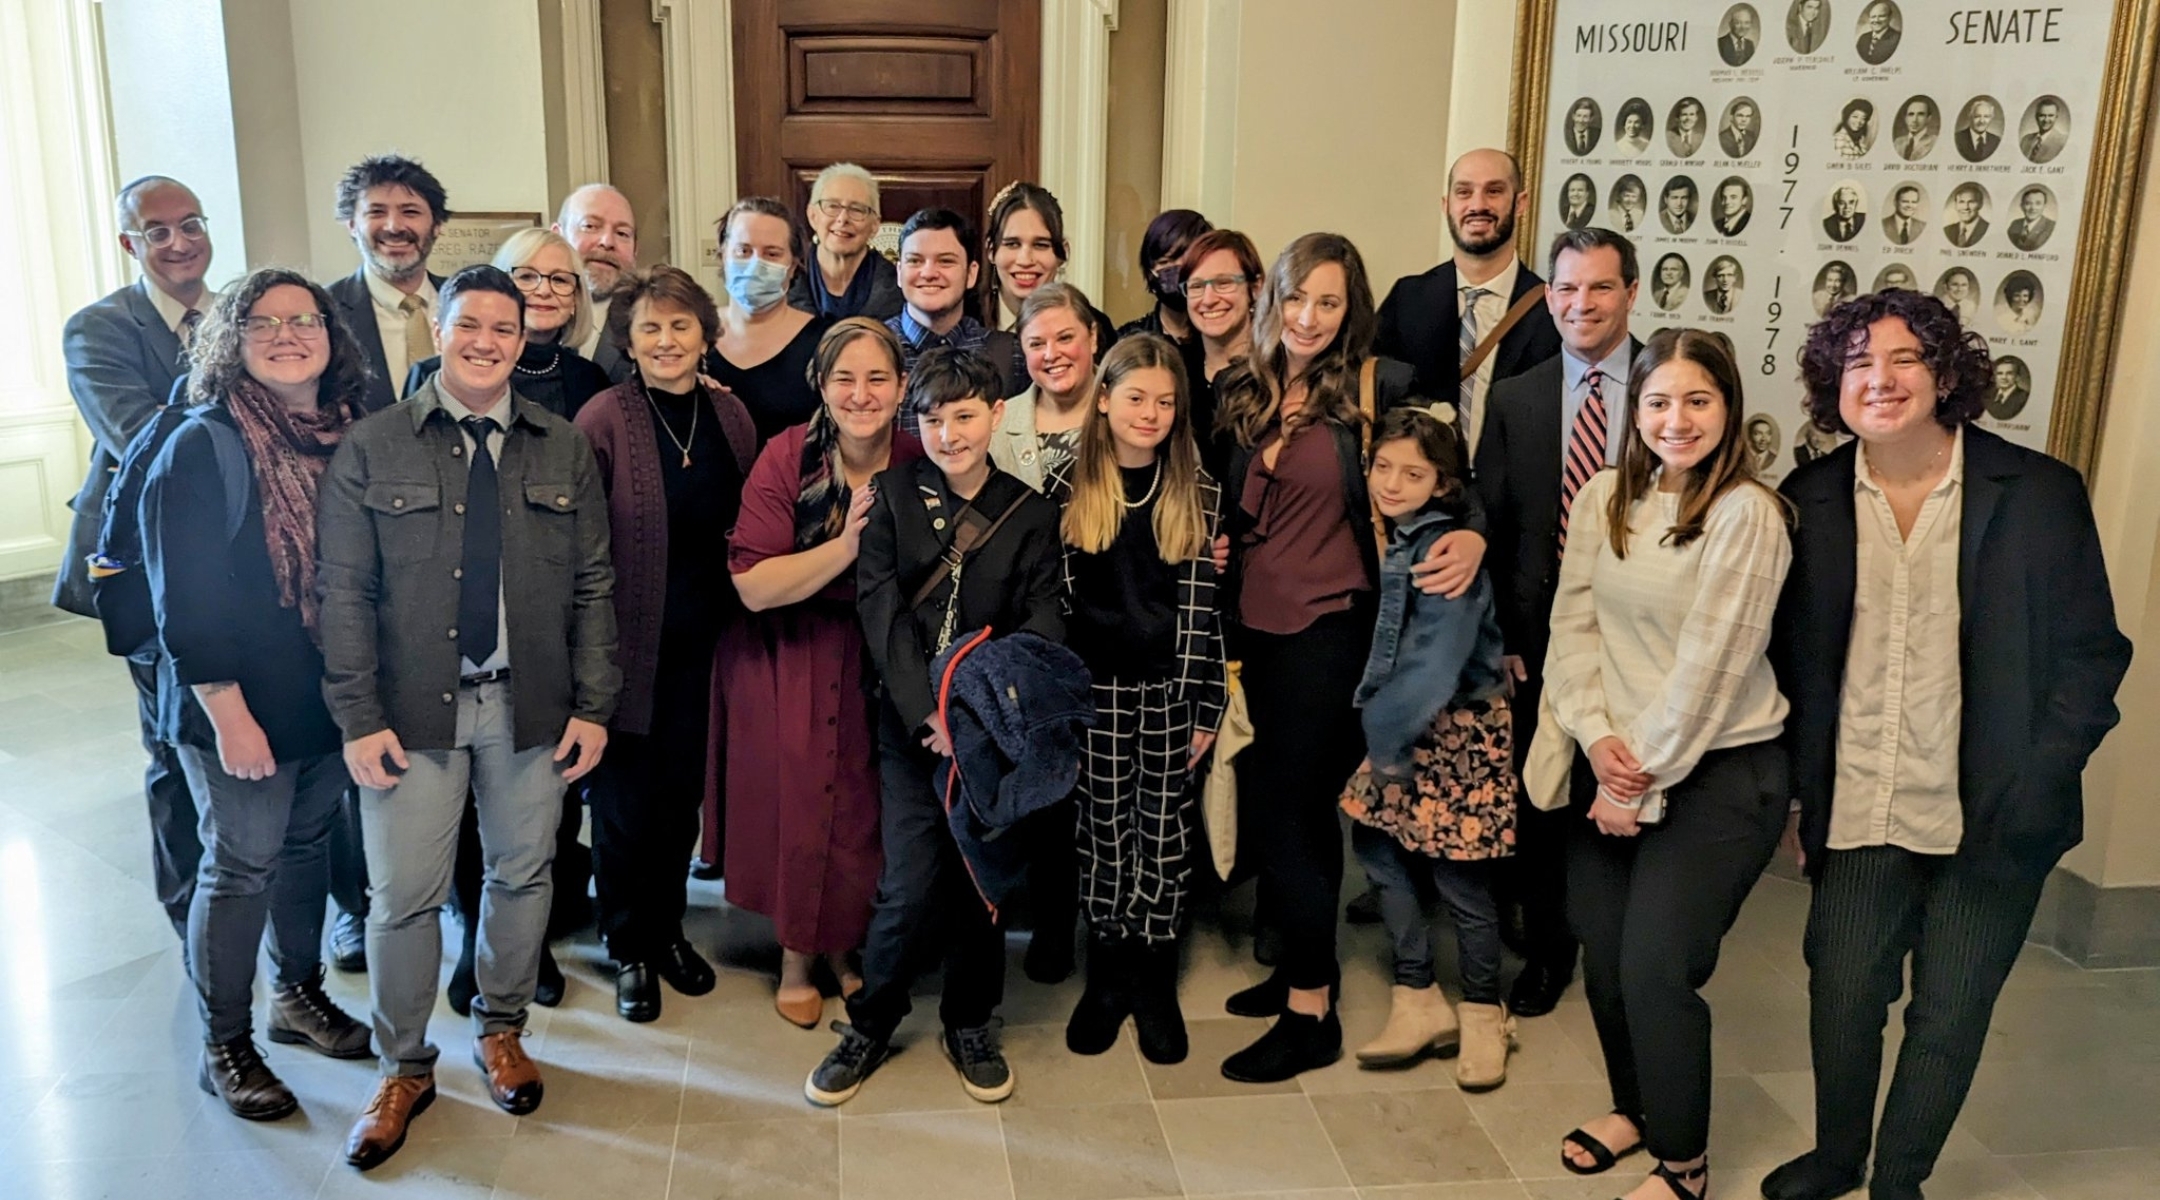 Jewish leaders from across Missouri came to Jefferson City to testify and lobby against various bills that would restrict the rights of trans people. (Courtesy of Daniel Bogard)